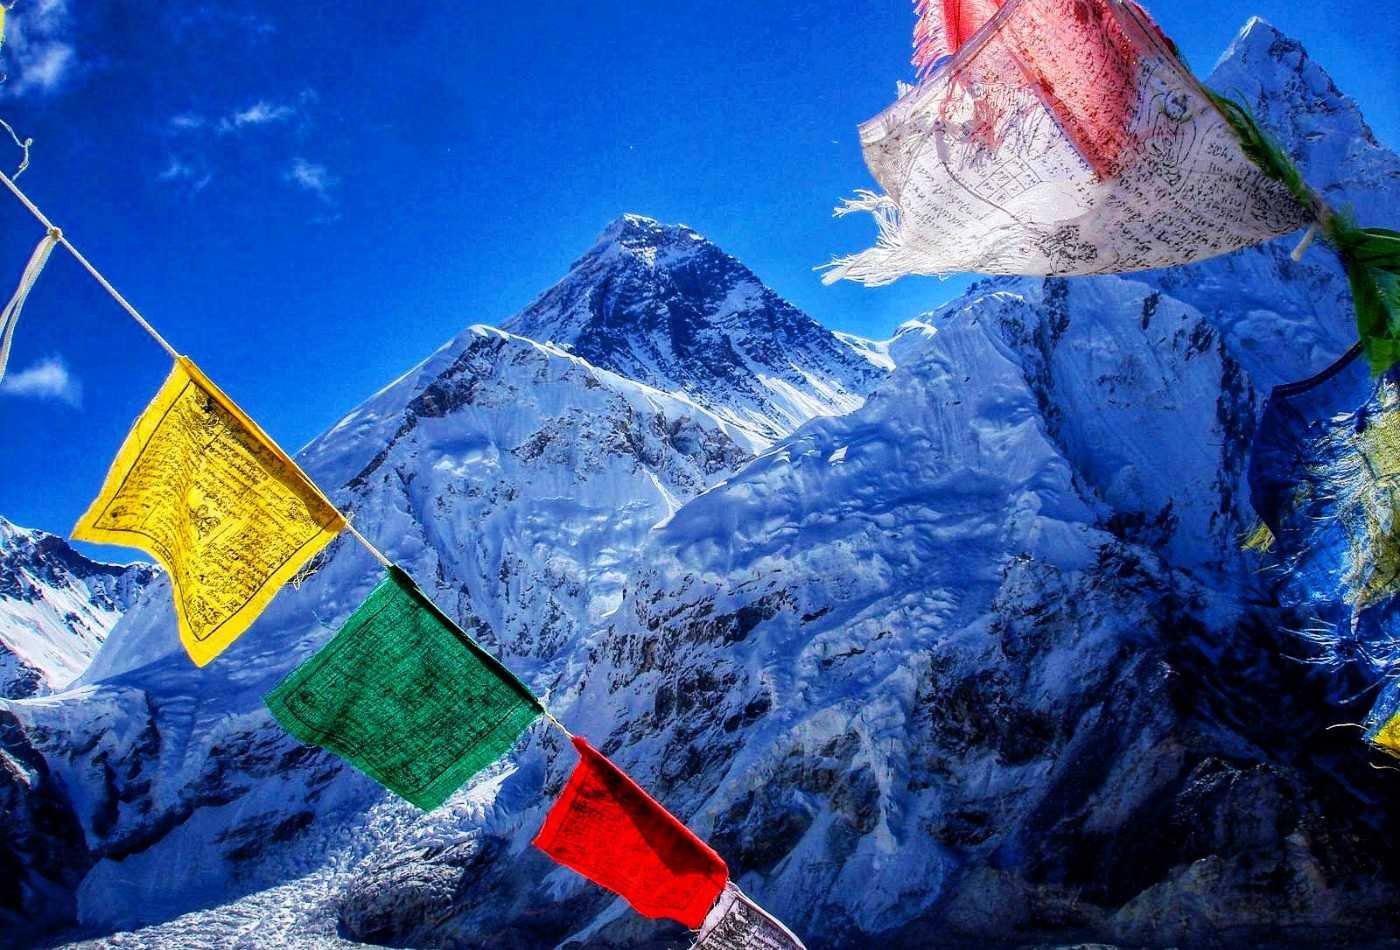 A small player flag stands in front of Mt. Everest, the highest peak in the world, as viewed from Kalapatthar.